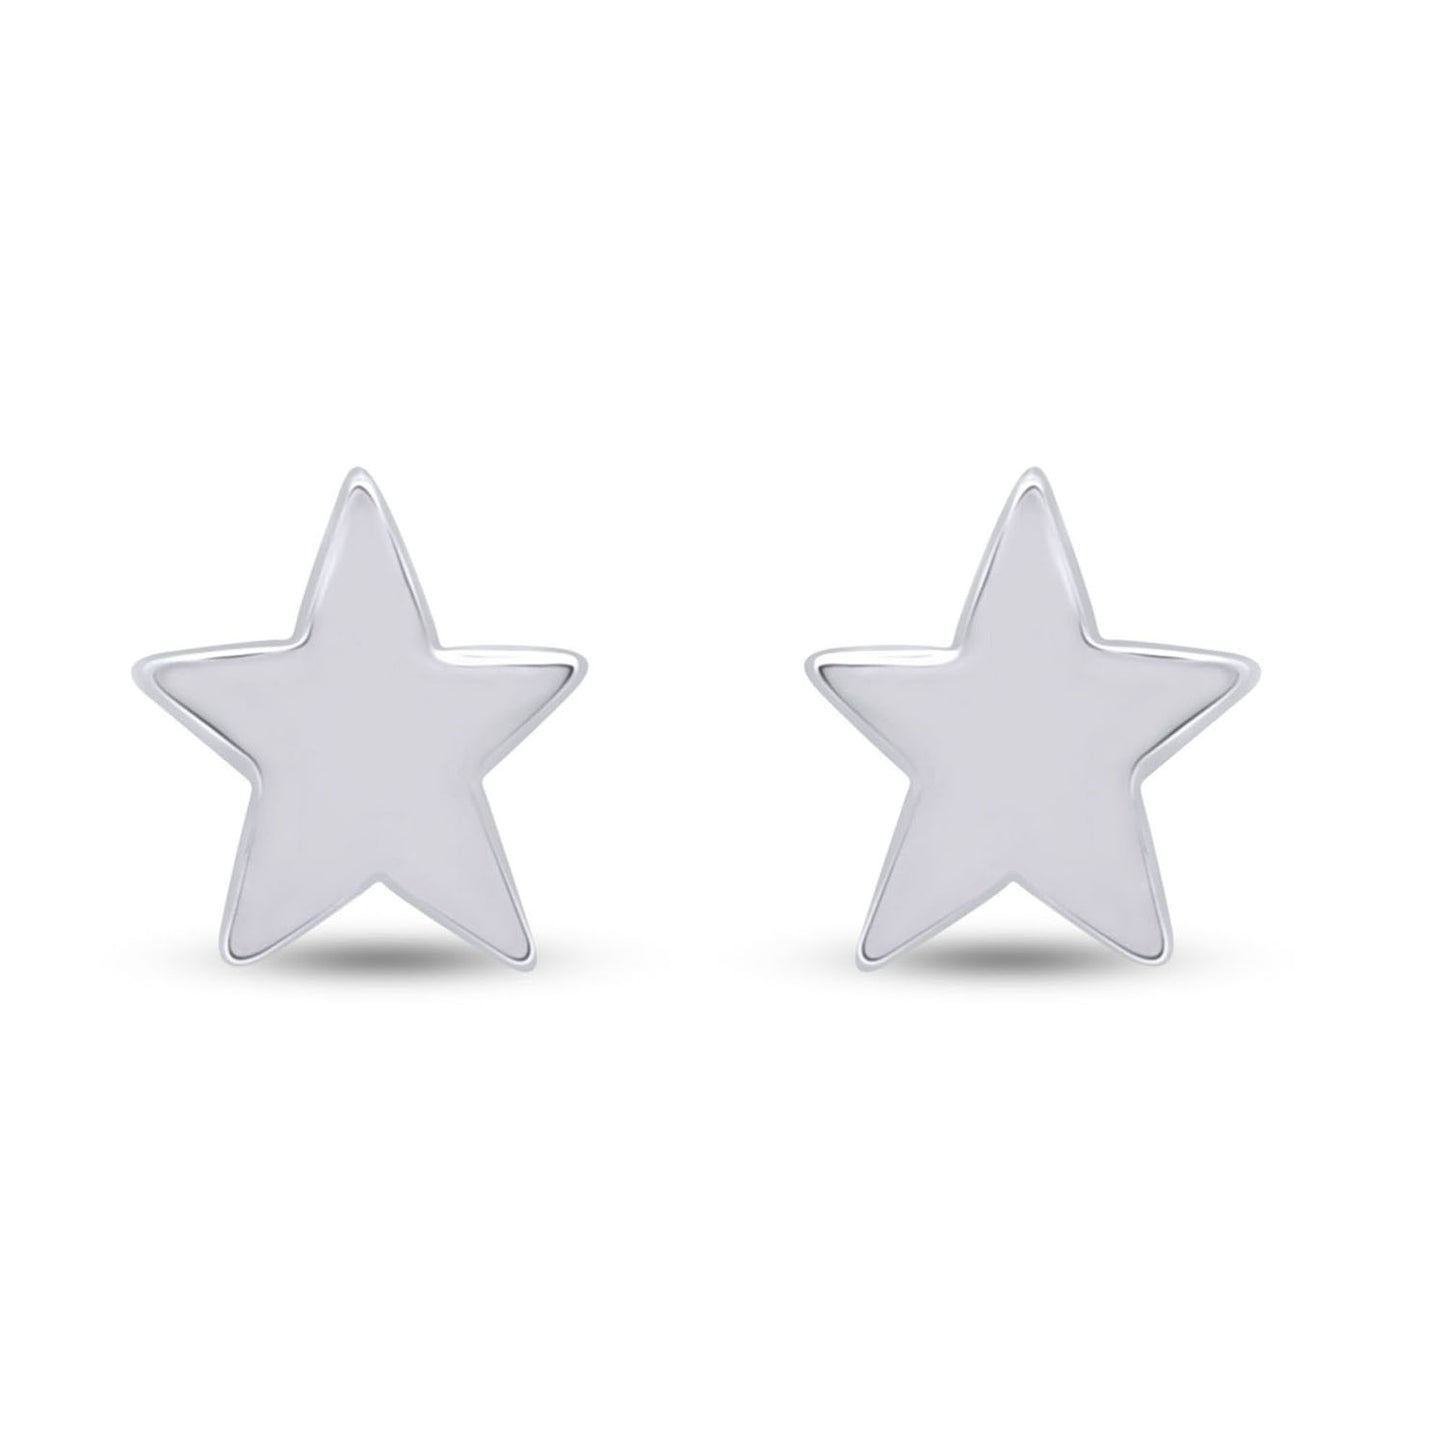 Load image into Gallery viewer, Star Stud Earrings in 925 Sterling Silver Push Back Jewelry for Women
